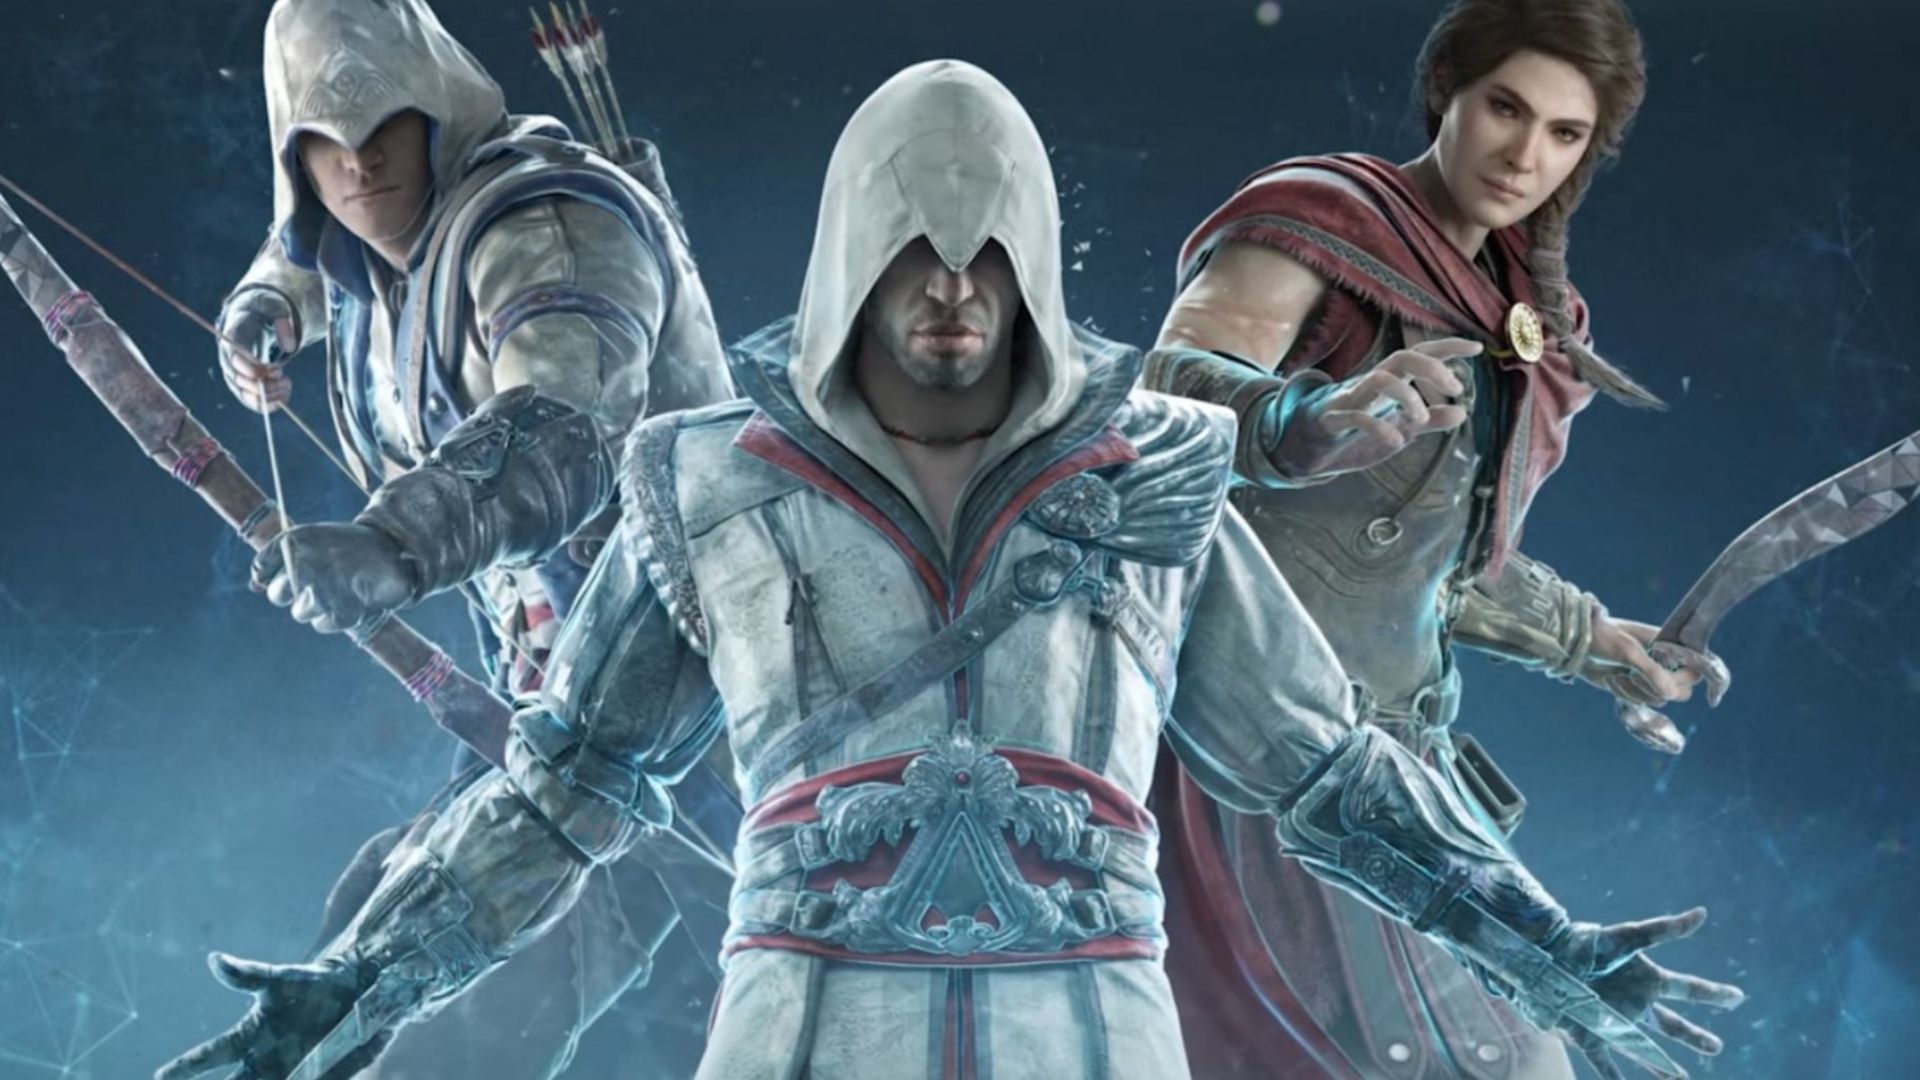 Top 10 Assassin's Creed Protagonists